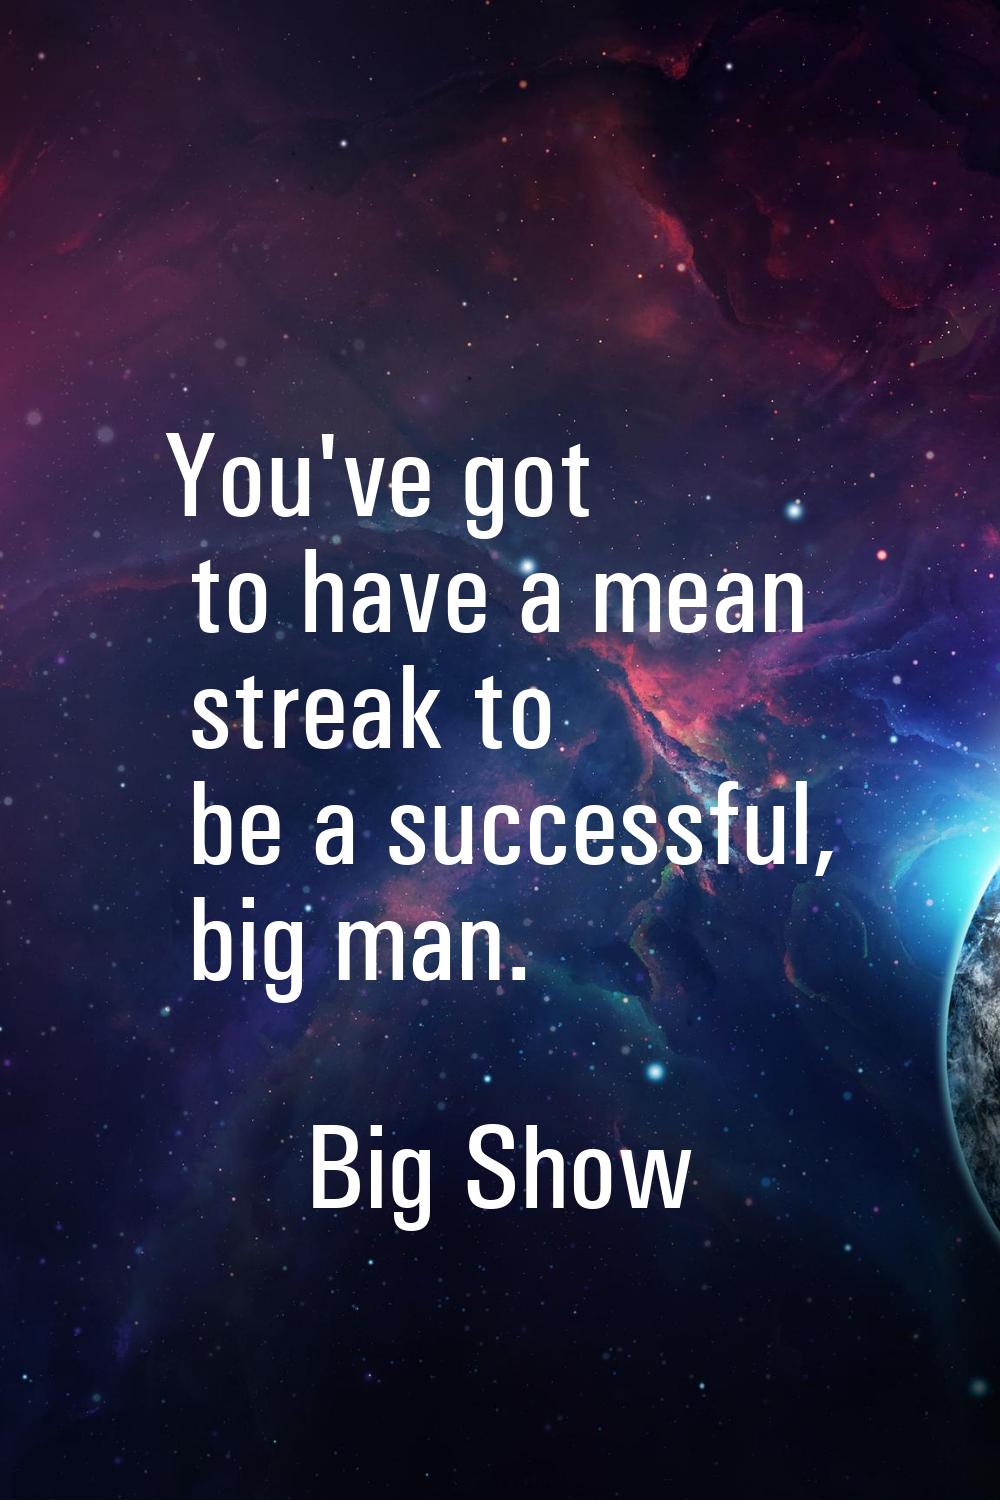 You've got to have a mean streak to be a successful, big man.